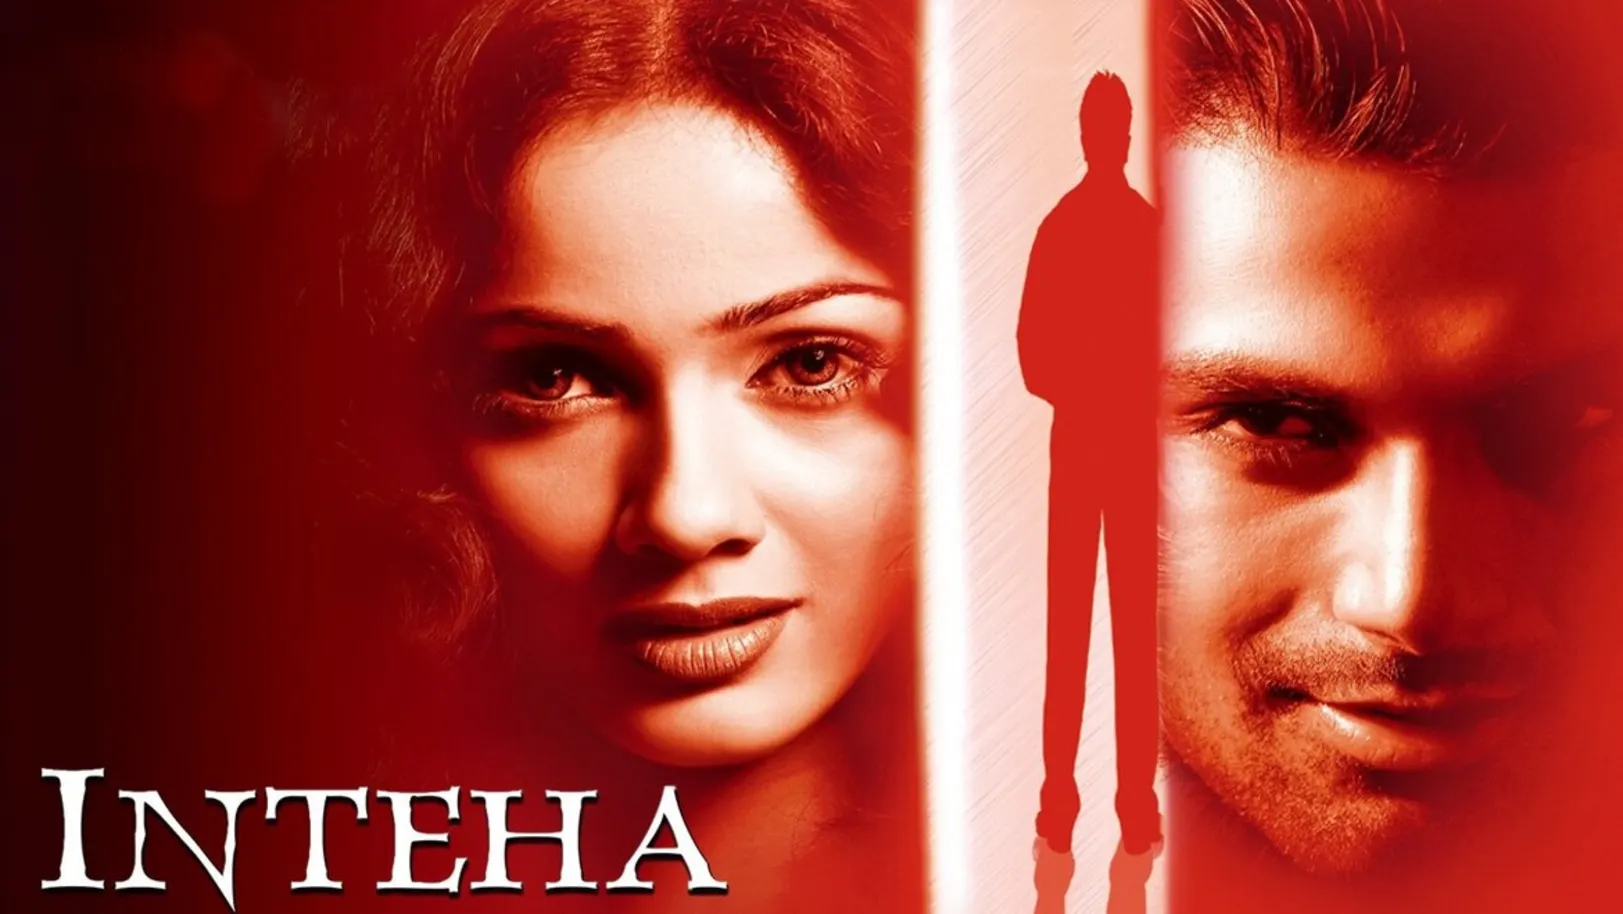 Inteha Streaming Now On &Pictures